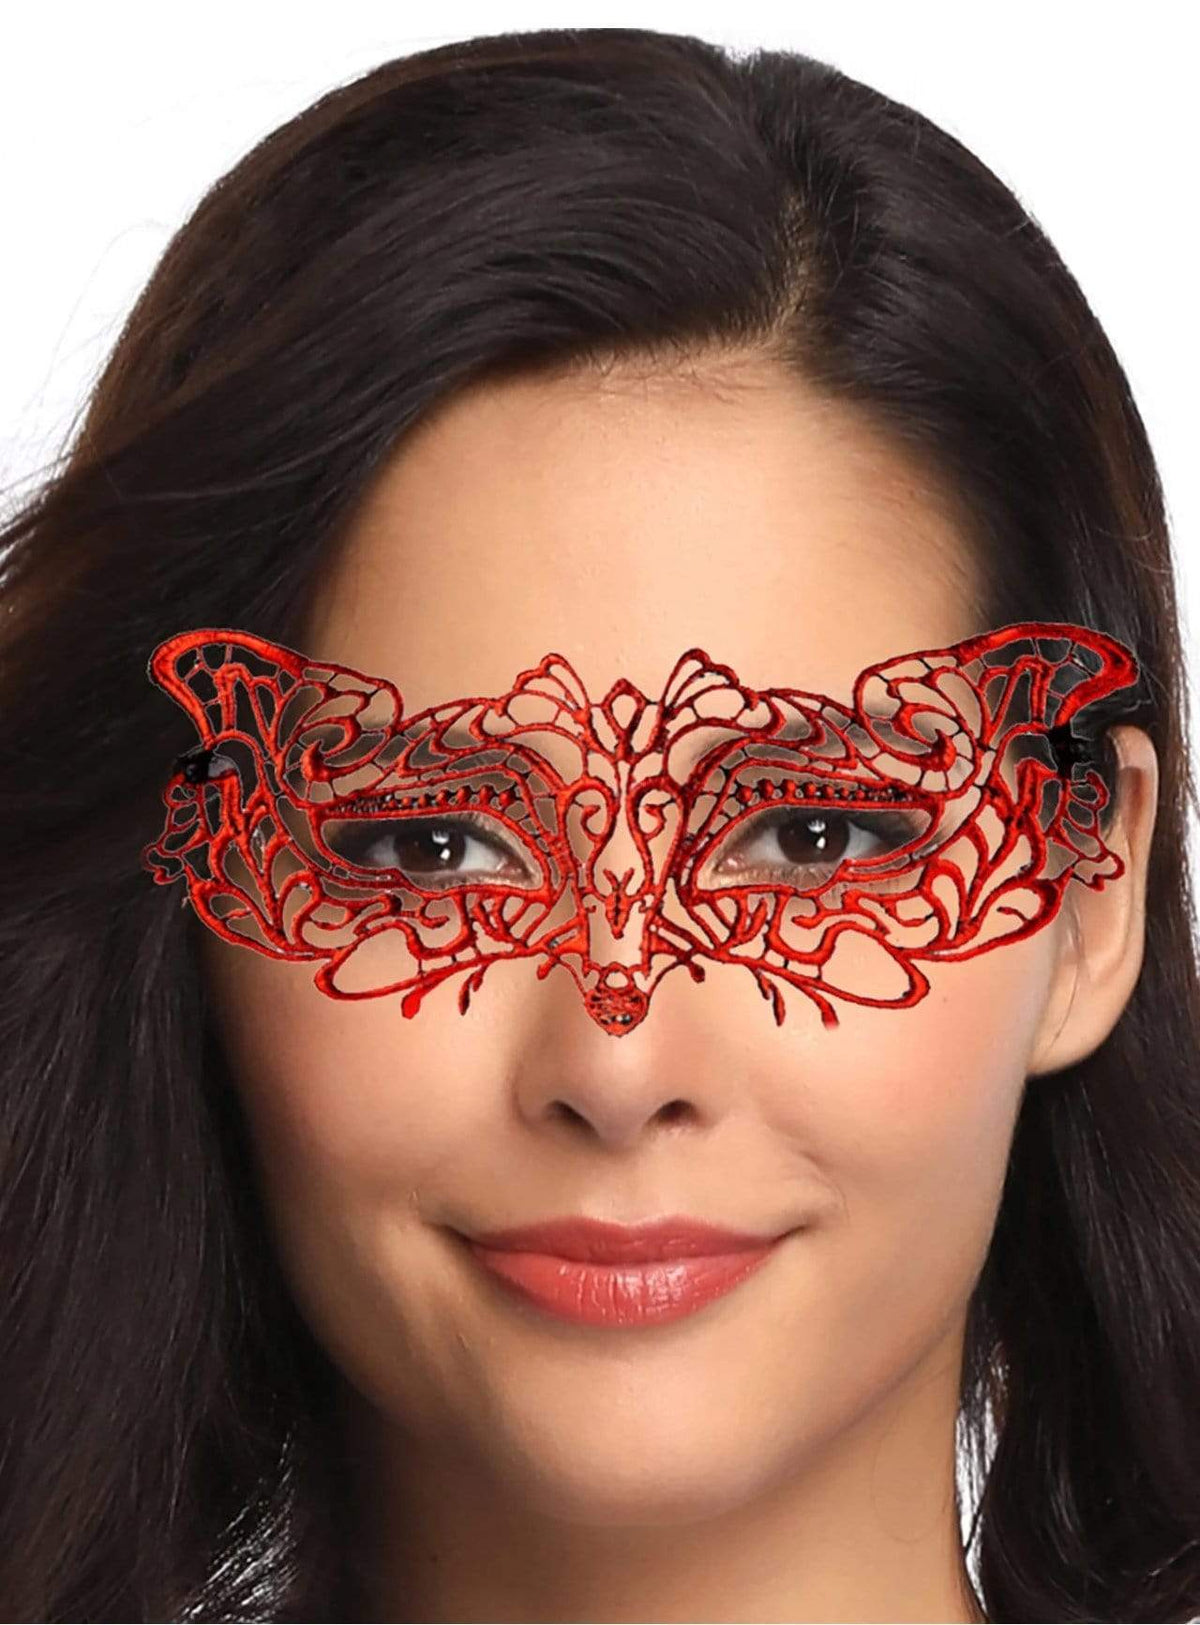 Intricate Red Woven Lace Masquerade Mask Headpiece